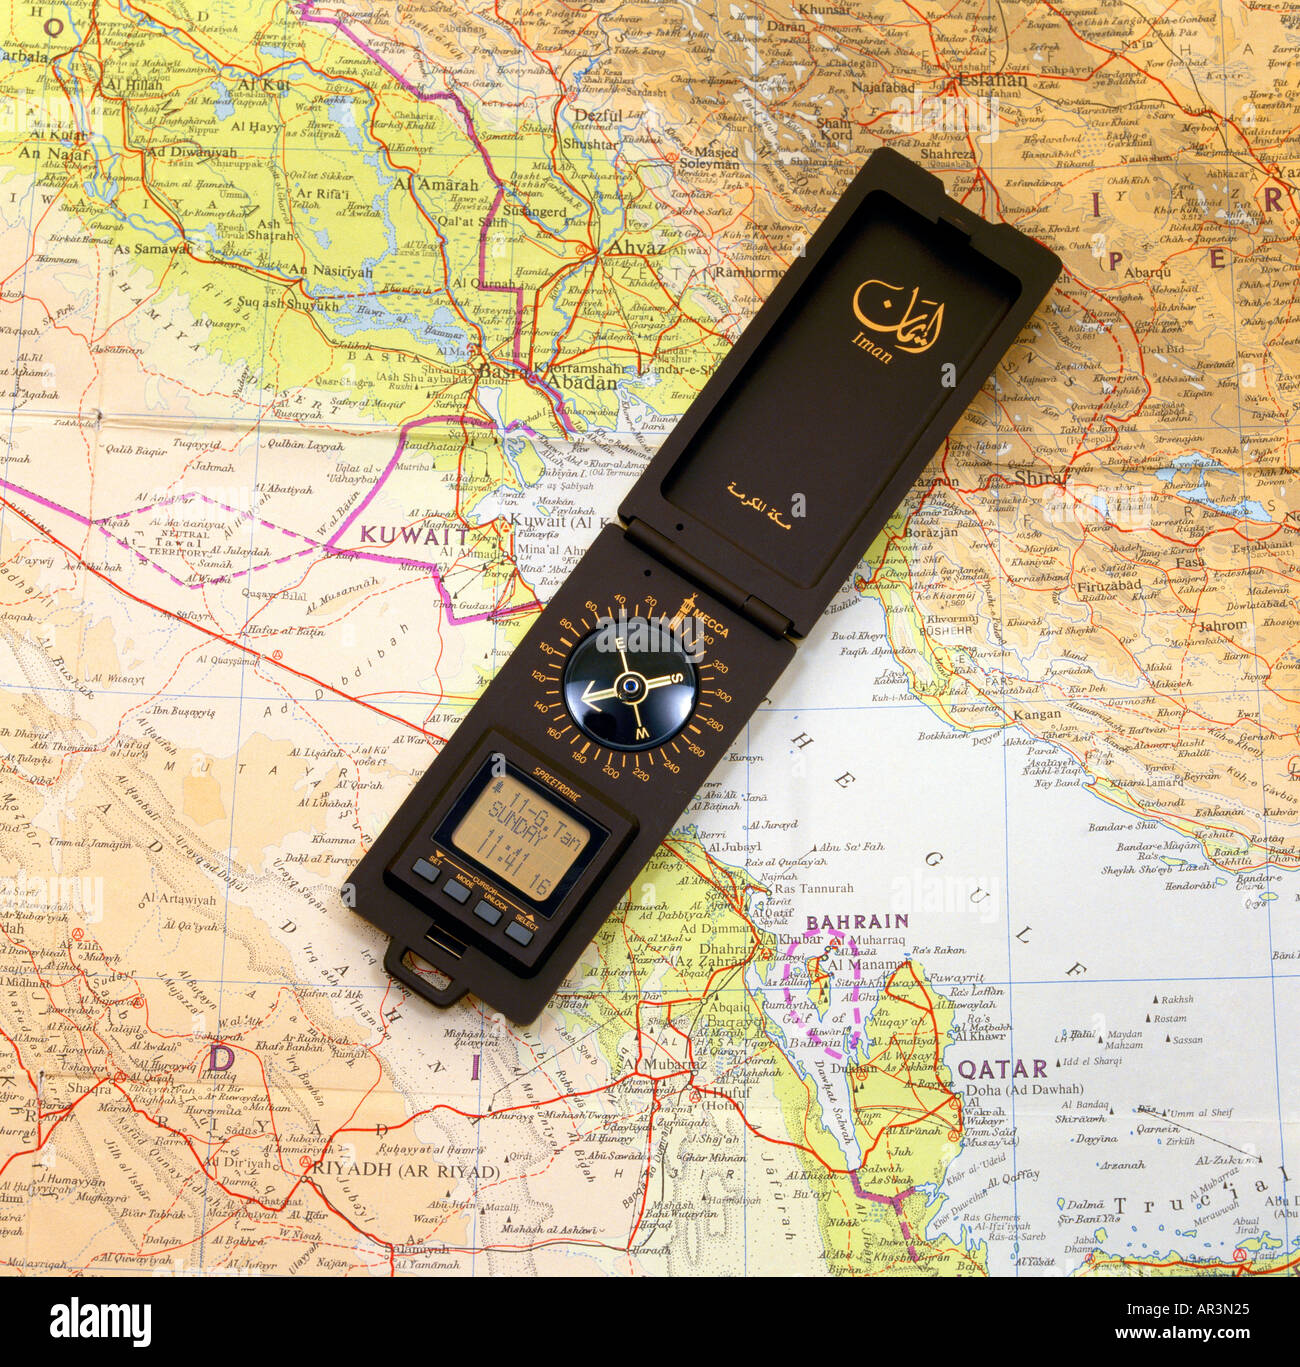 Qibla Compass Used For Finding The Direction of Makkah & Map of Middle East  Stock Photo - Alamy